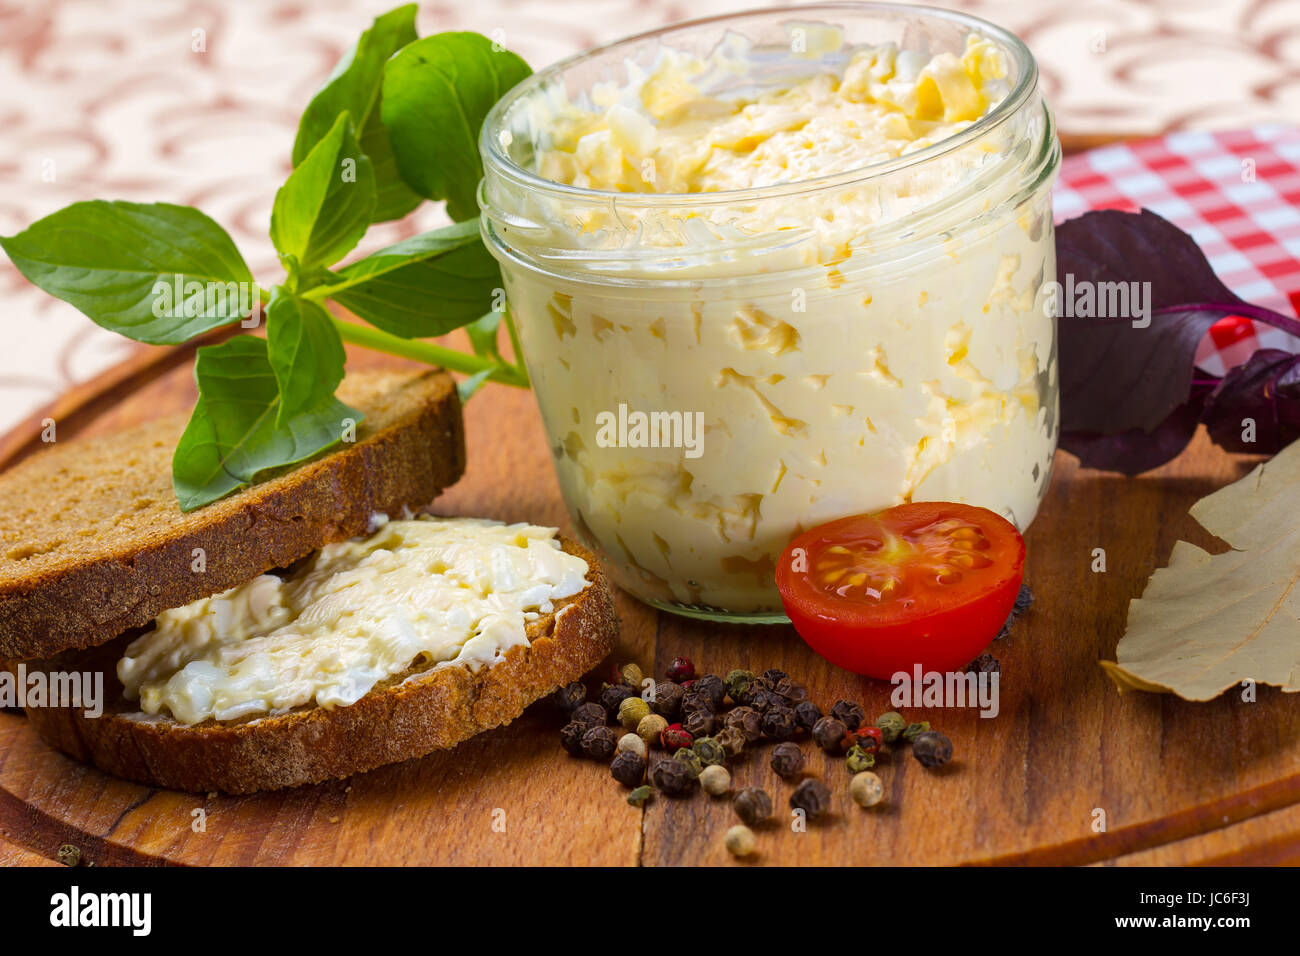 Fresh cream cheese with rye bread, herbs and spices, served on a wooden plate Stock Photo